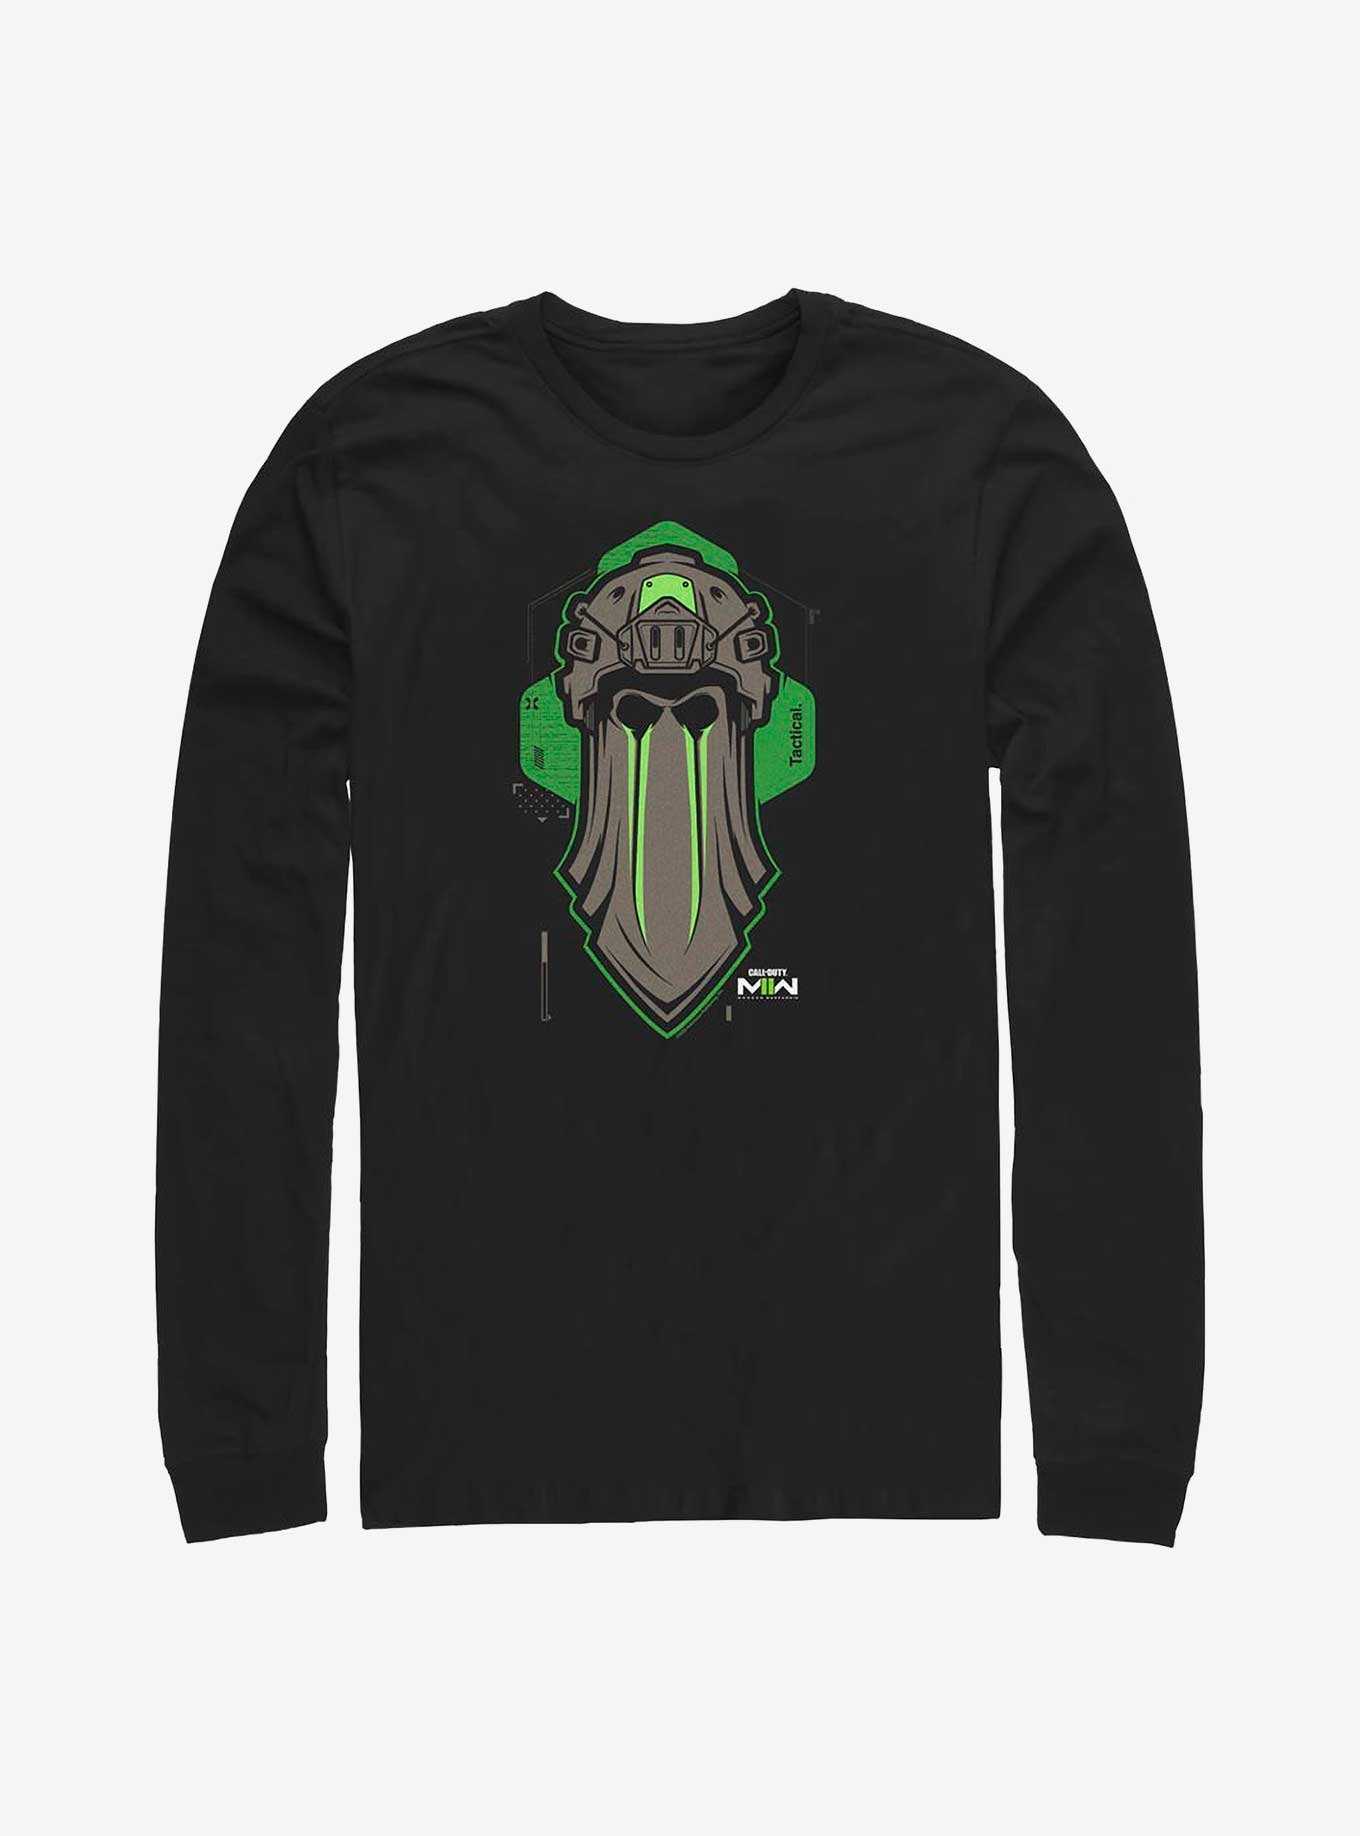 Call Of Duty Ghostly Sniper Long Sleeve T-Shirt, , hi-res